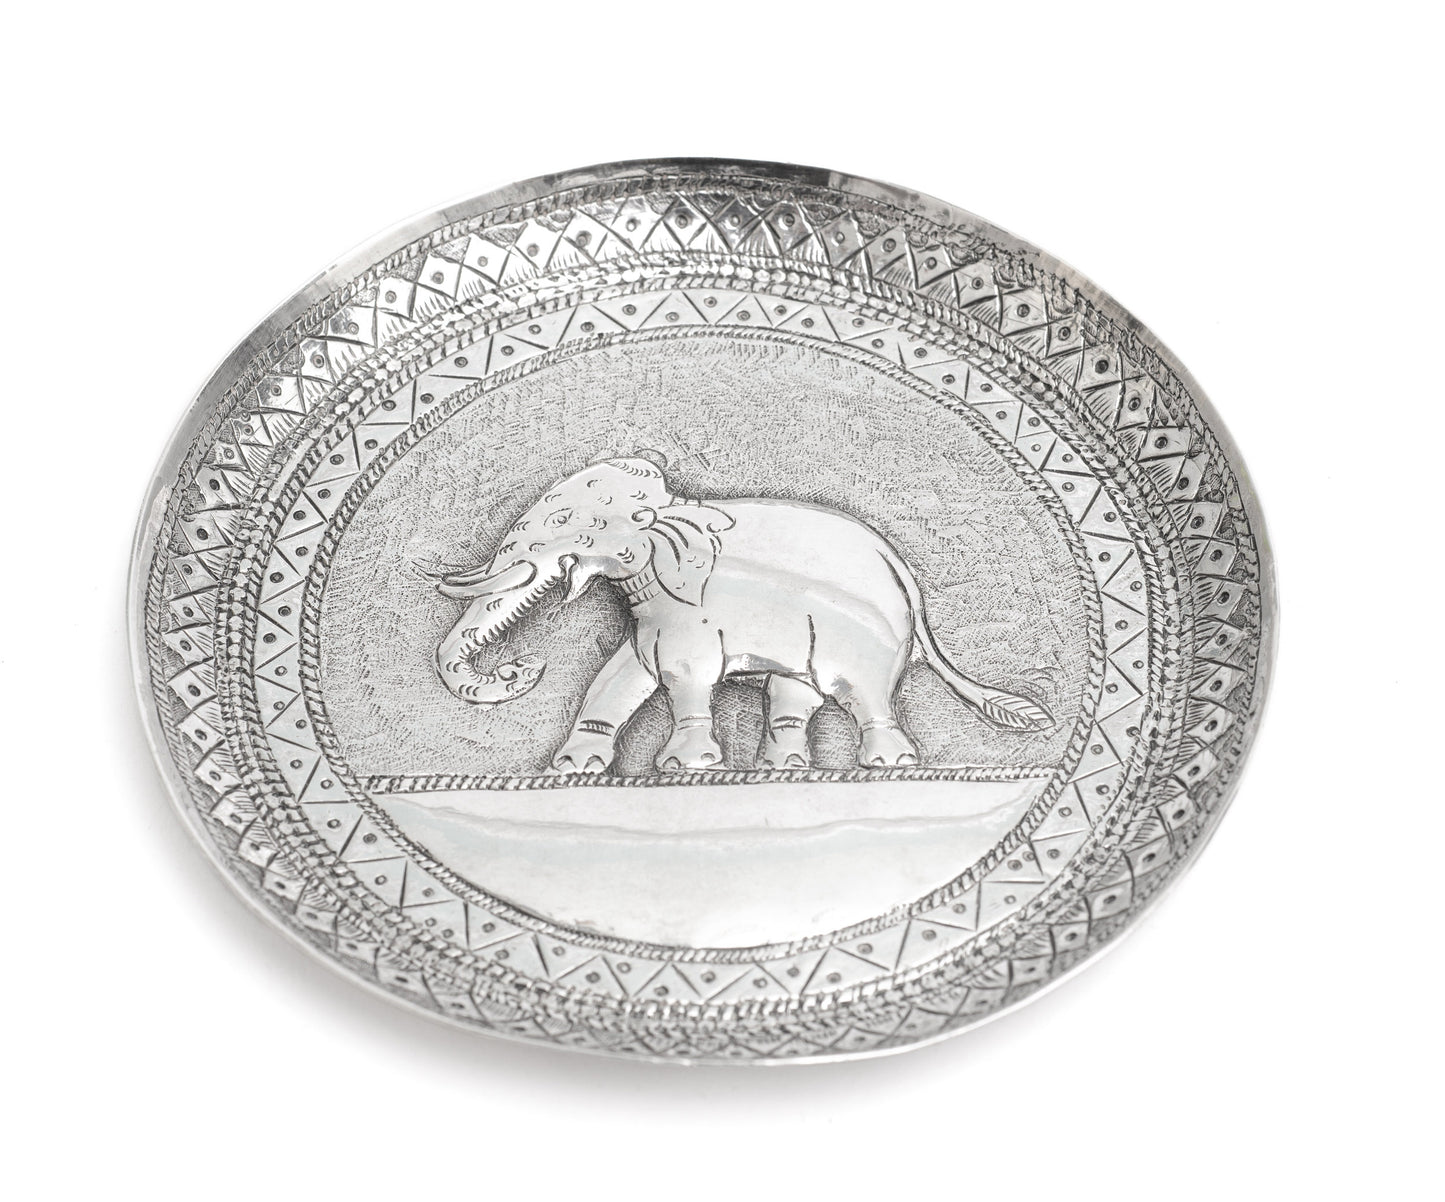 Antique Sri Lankan Hand Made Silver Dish with Repousse Elephant c1900 (Code 2251)